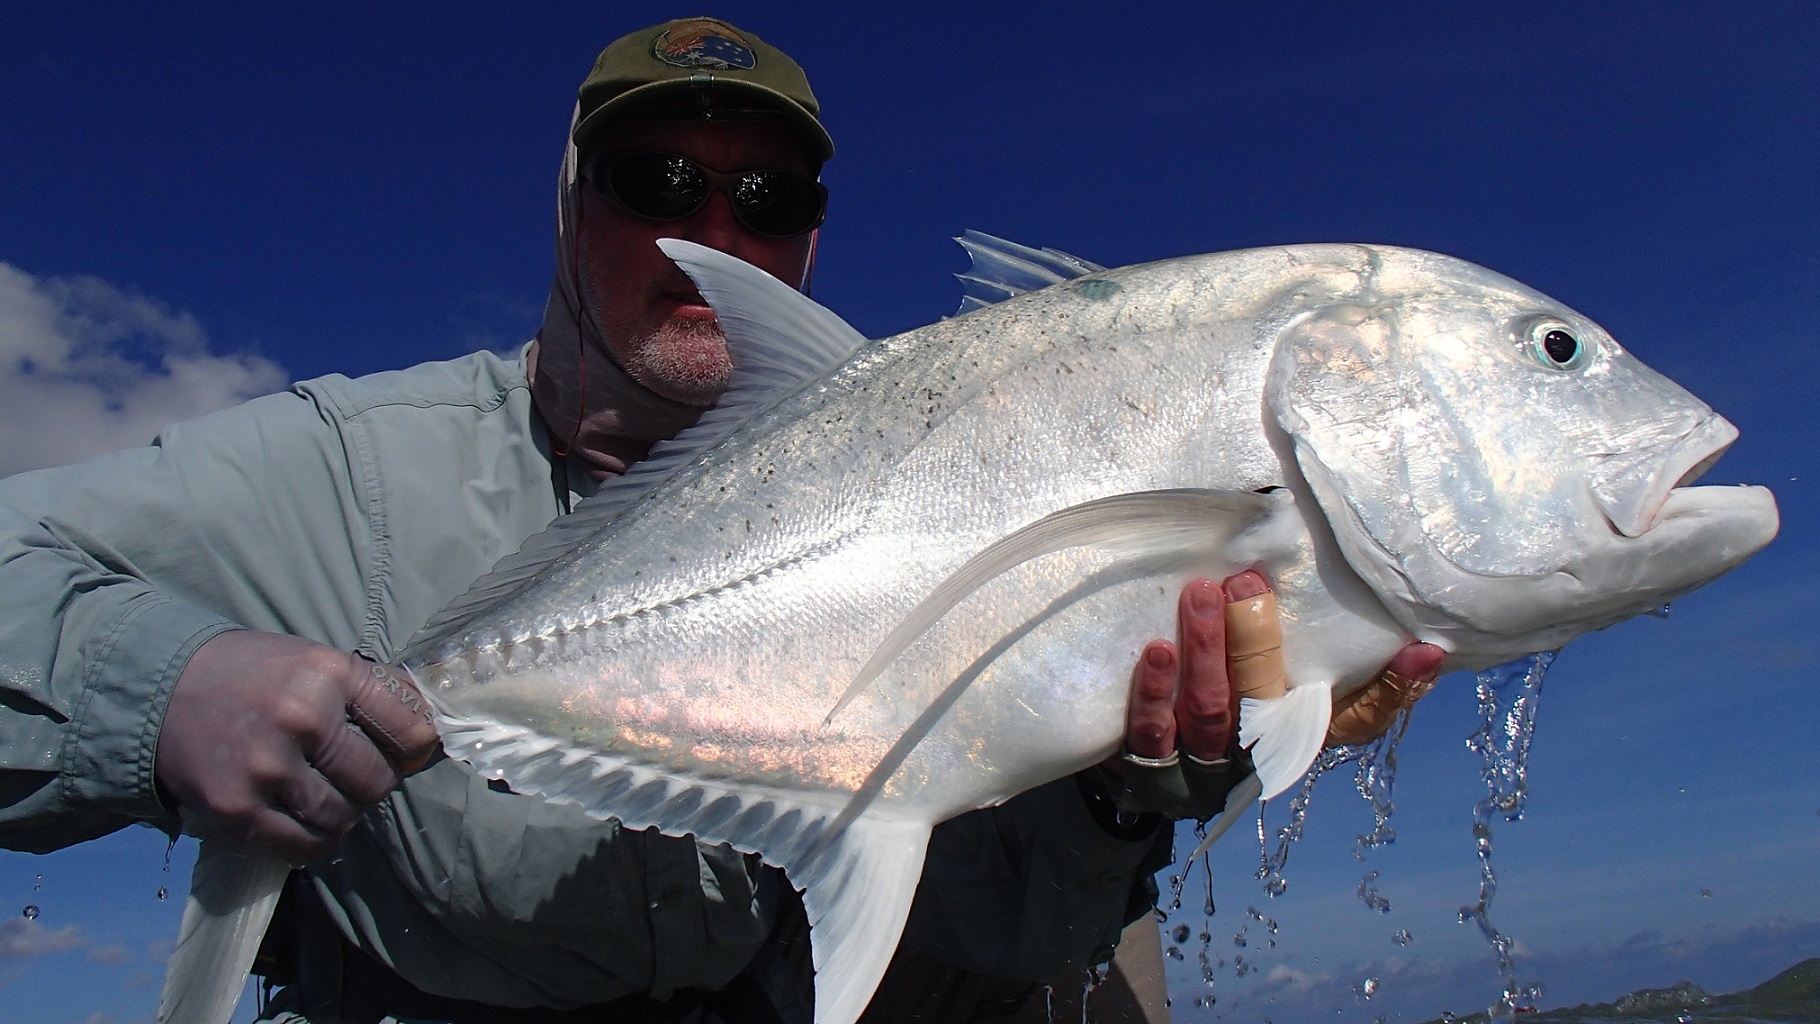 Giant Trevally on fly